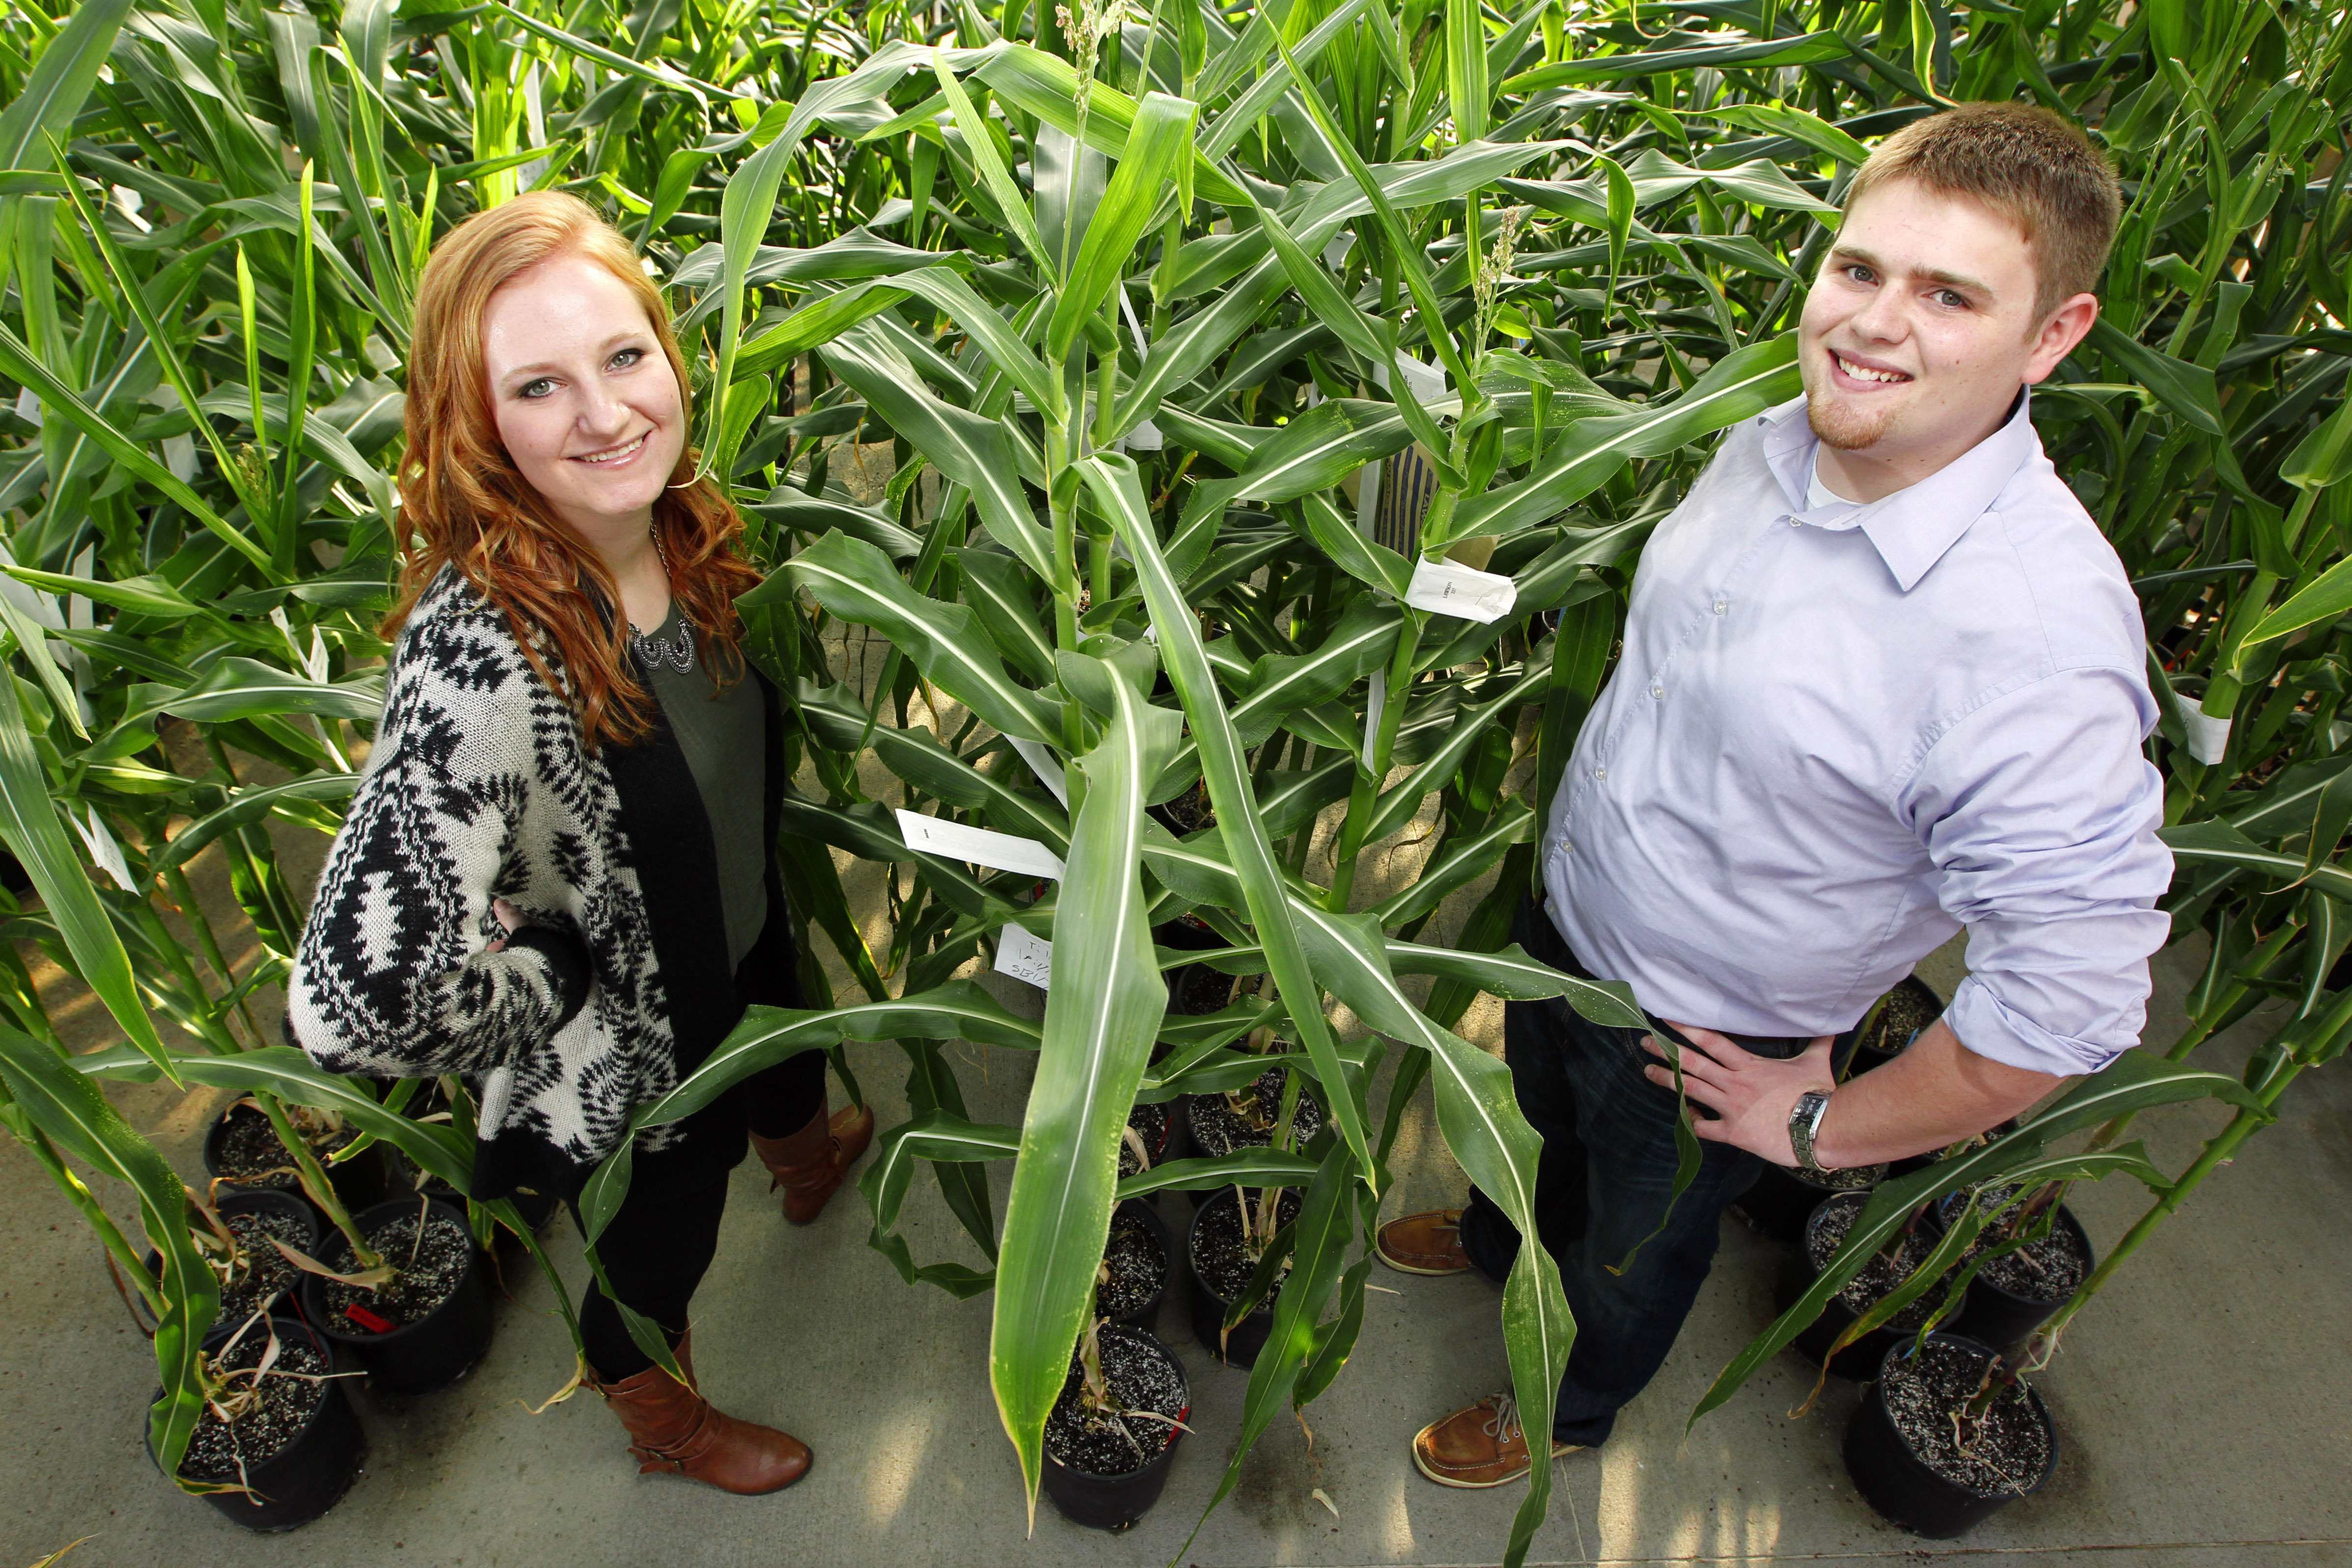 Iowa State students Olivia Reicks and Trey Forsyth in corn field